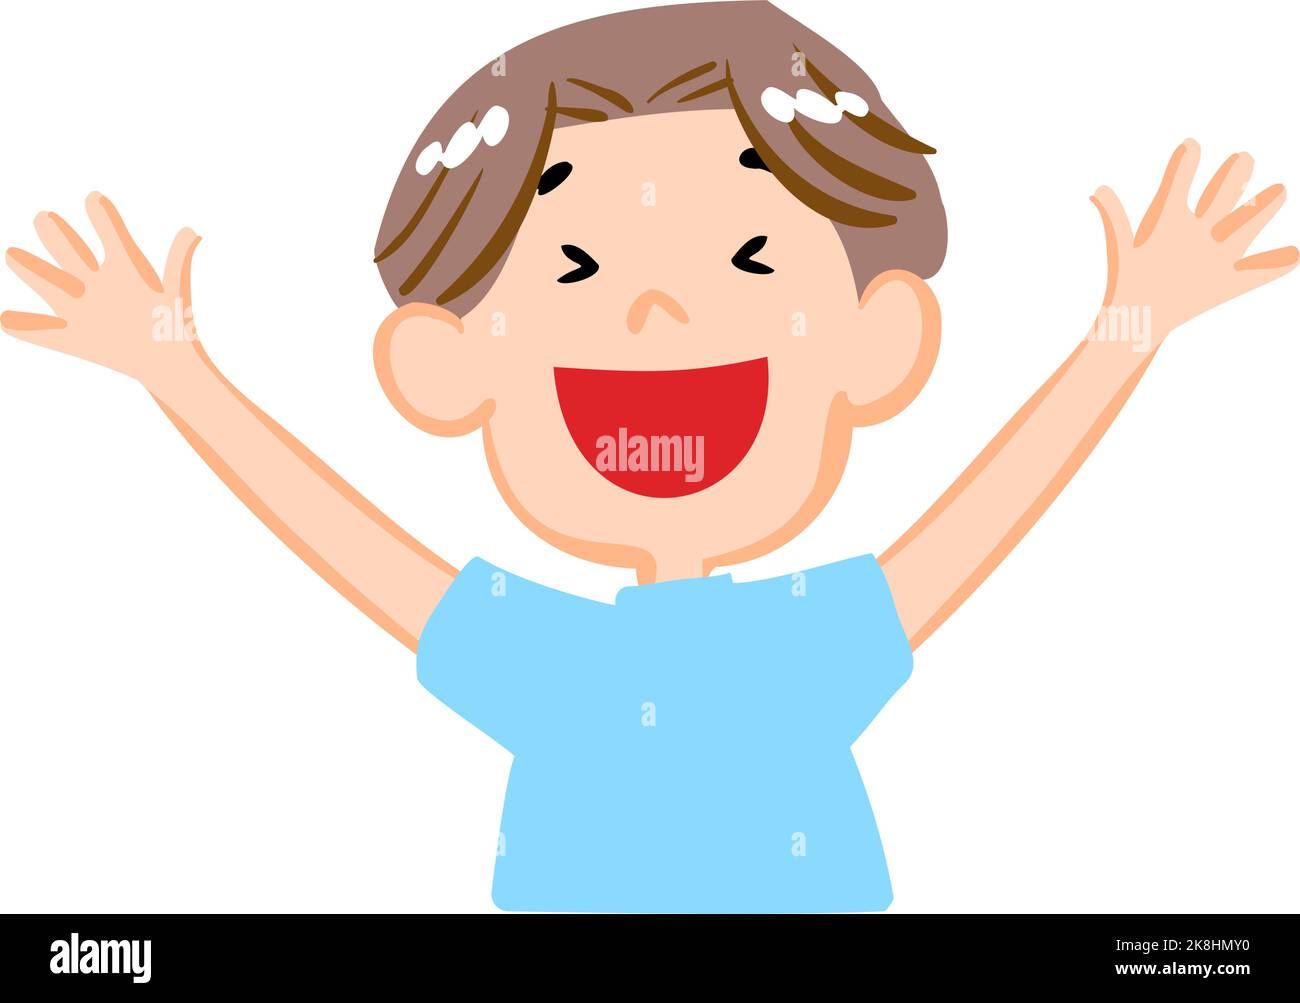 Illustration of a boy laughing with his mouth wide open Stock Vector